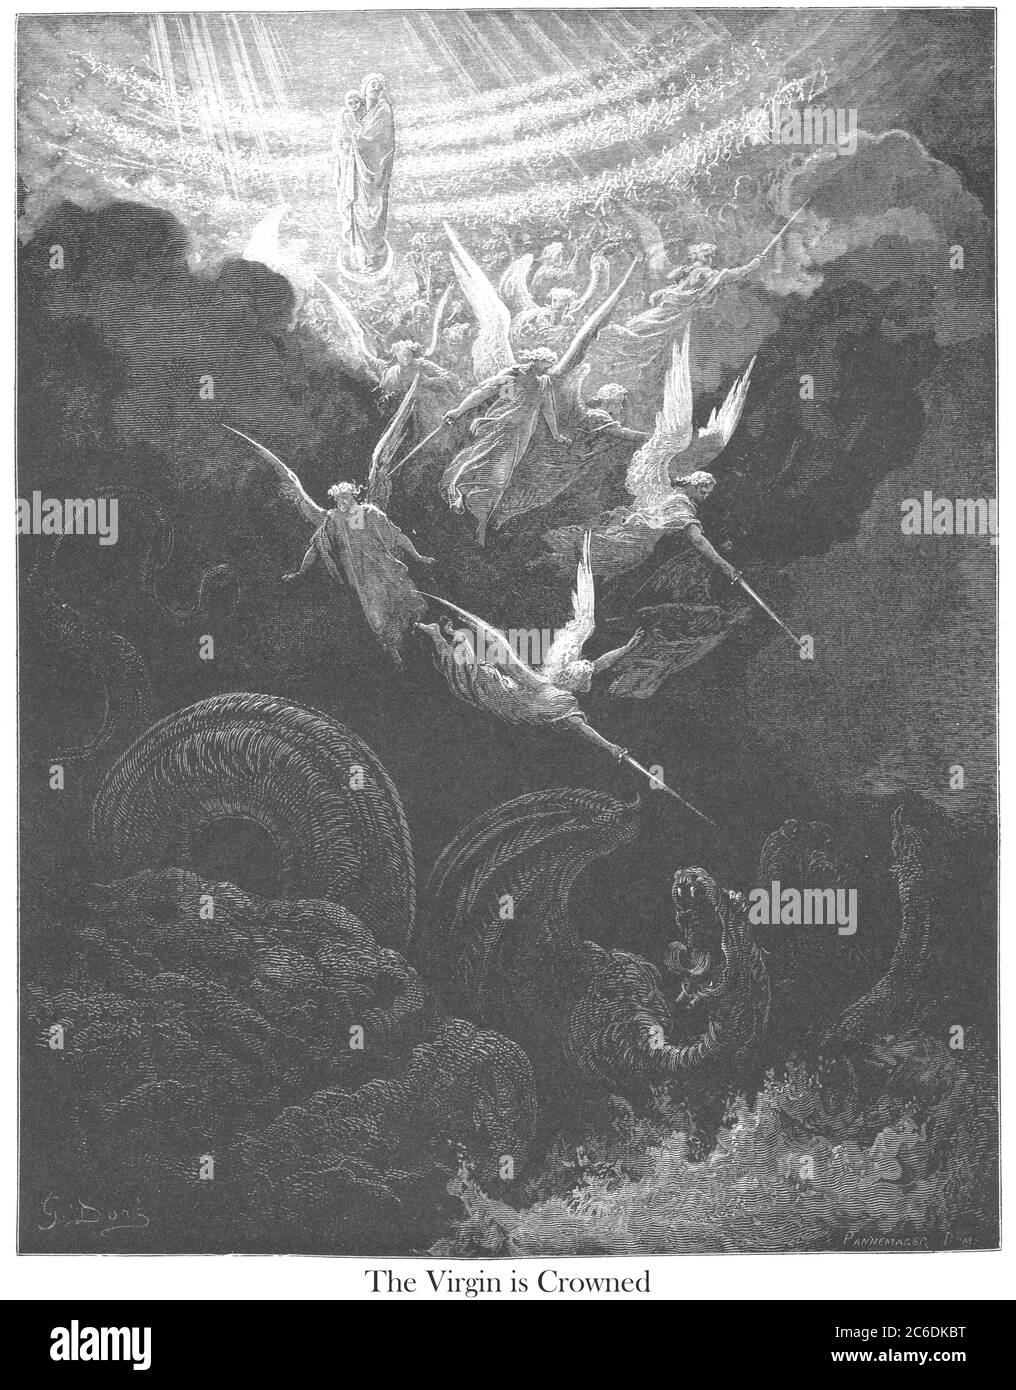 The Crowned Virgin: A Vision of John [Revelation 12:1-3] From the book 'Bible Gallery' Illustrated by Gustave Dore with Memoir of Dore and Descriptive Letter-press by Talbot W. Chambers D.D. Published by Cassell & Company Limited in London and simultaneously by Mame in Tours, France in 1866 Stock Photo